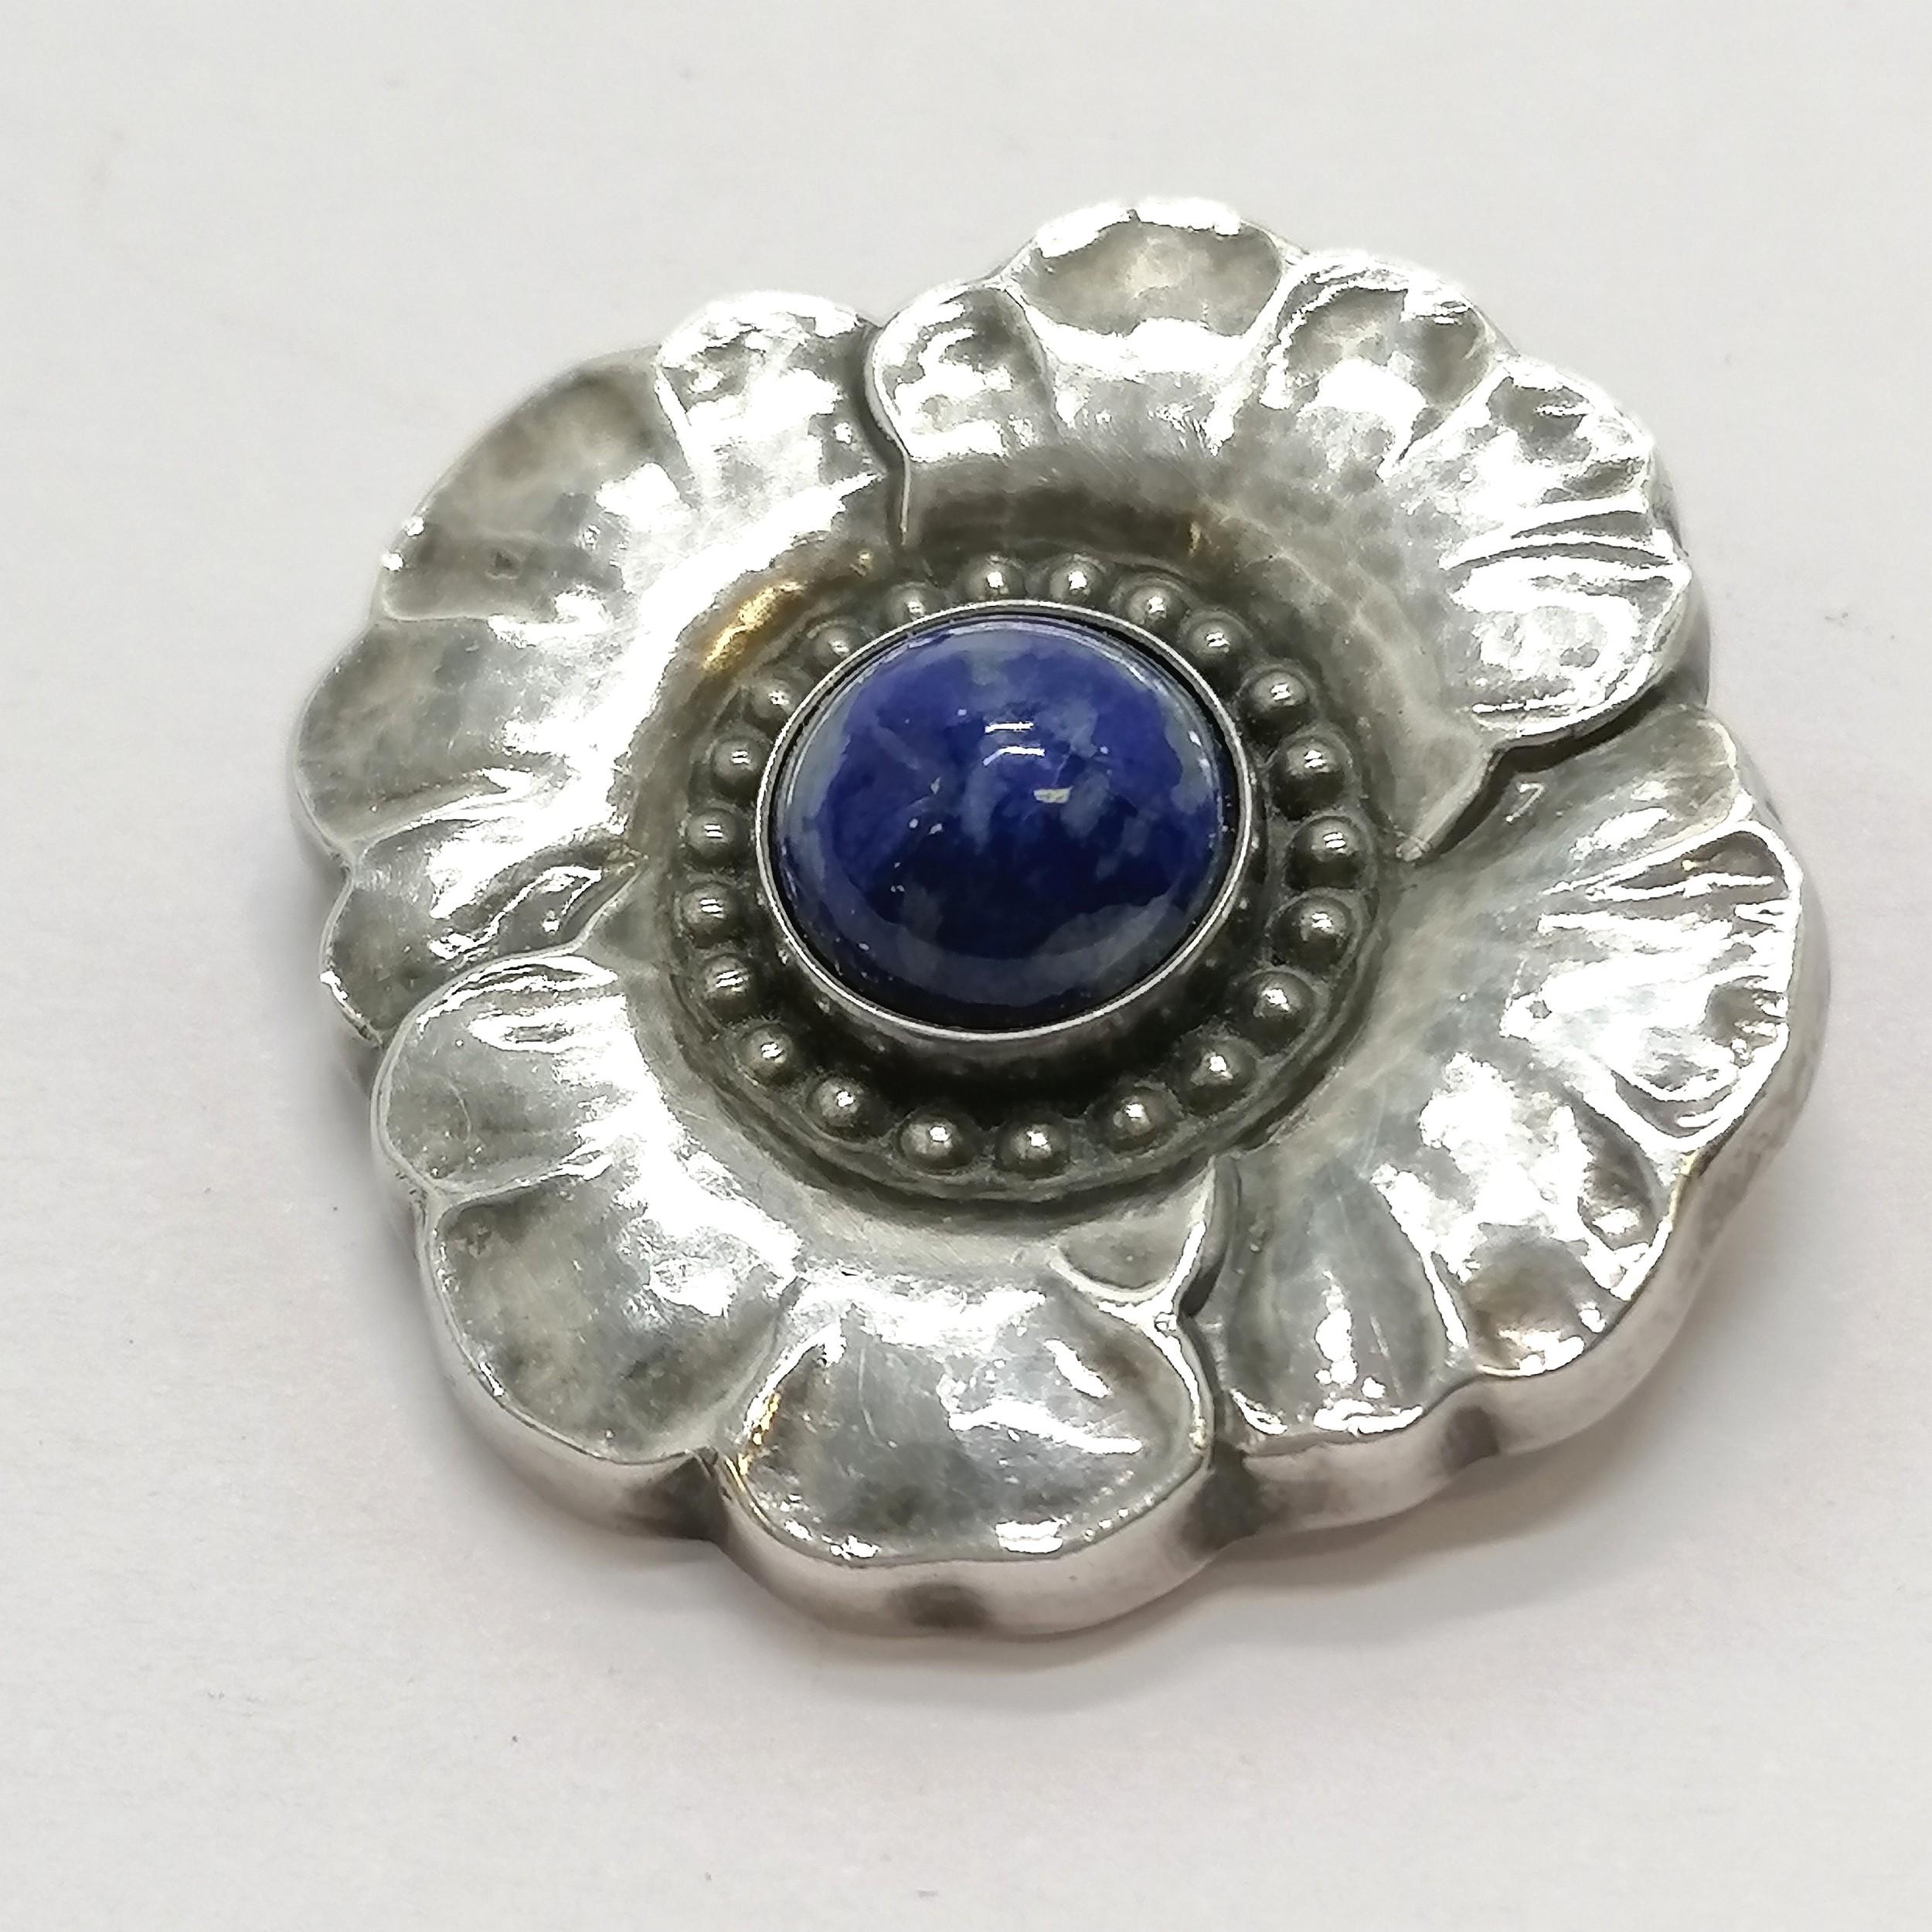 Georg Jensen silver flower brooch #189 set with cabochon lapis - 3cm across & 9g total weight - Image 3 of 5